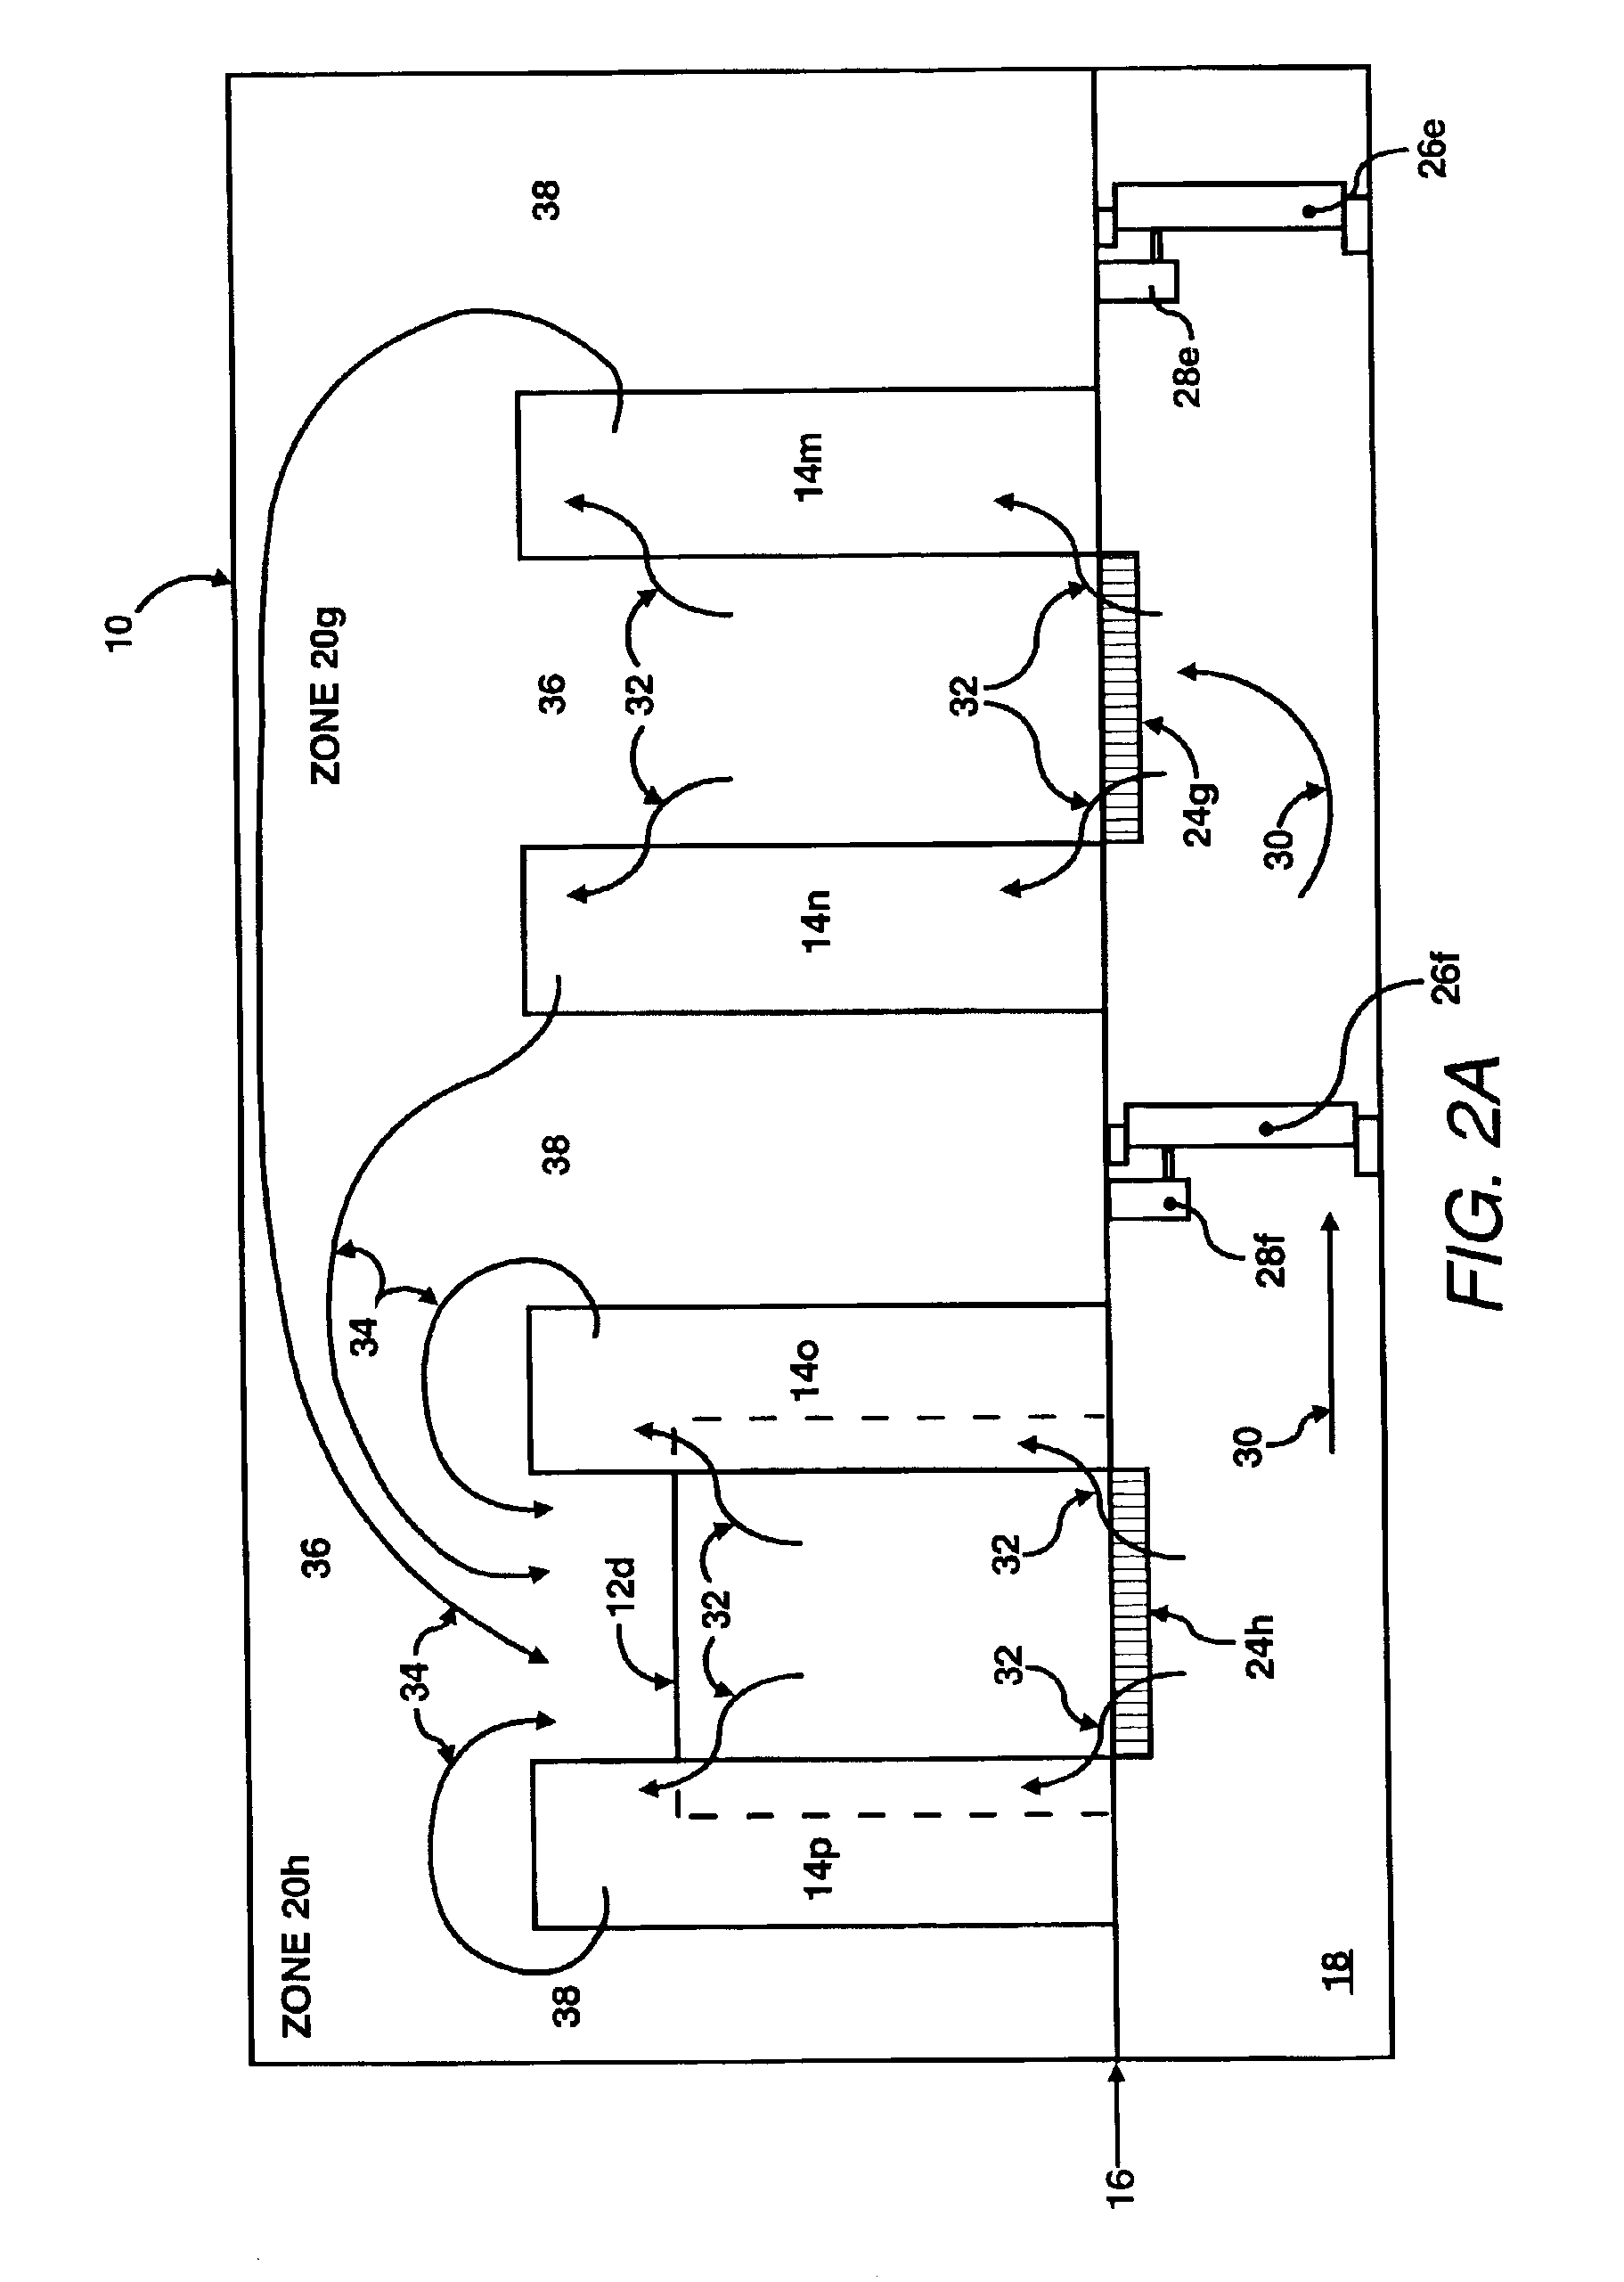 Partition for varying the supply of cooling fluid